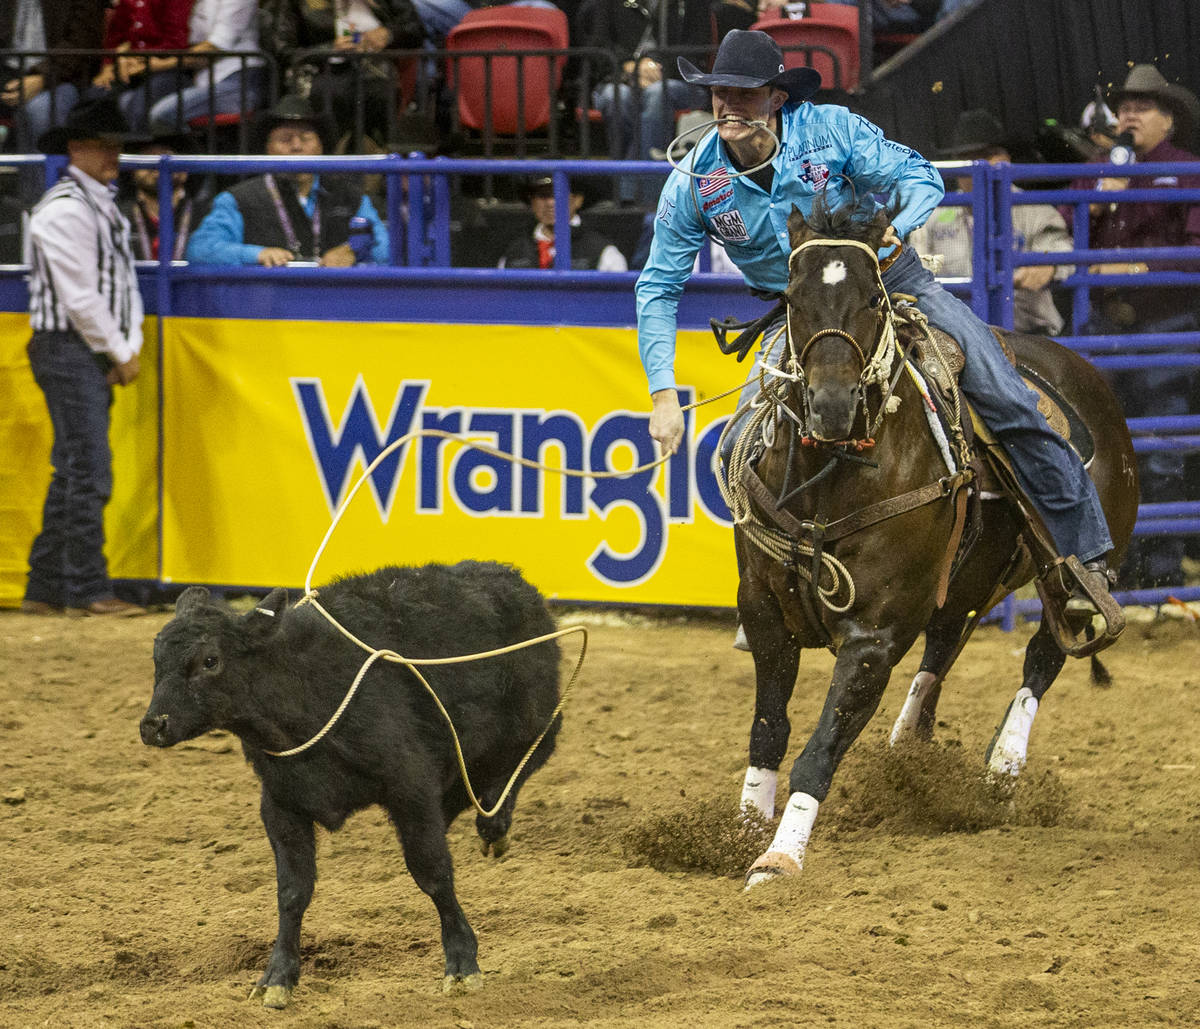 Tuf Cooper of Decatur, Texas, eyes his steer in Tie-Down Roping at the tenth go round of the Wr ...